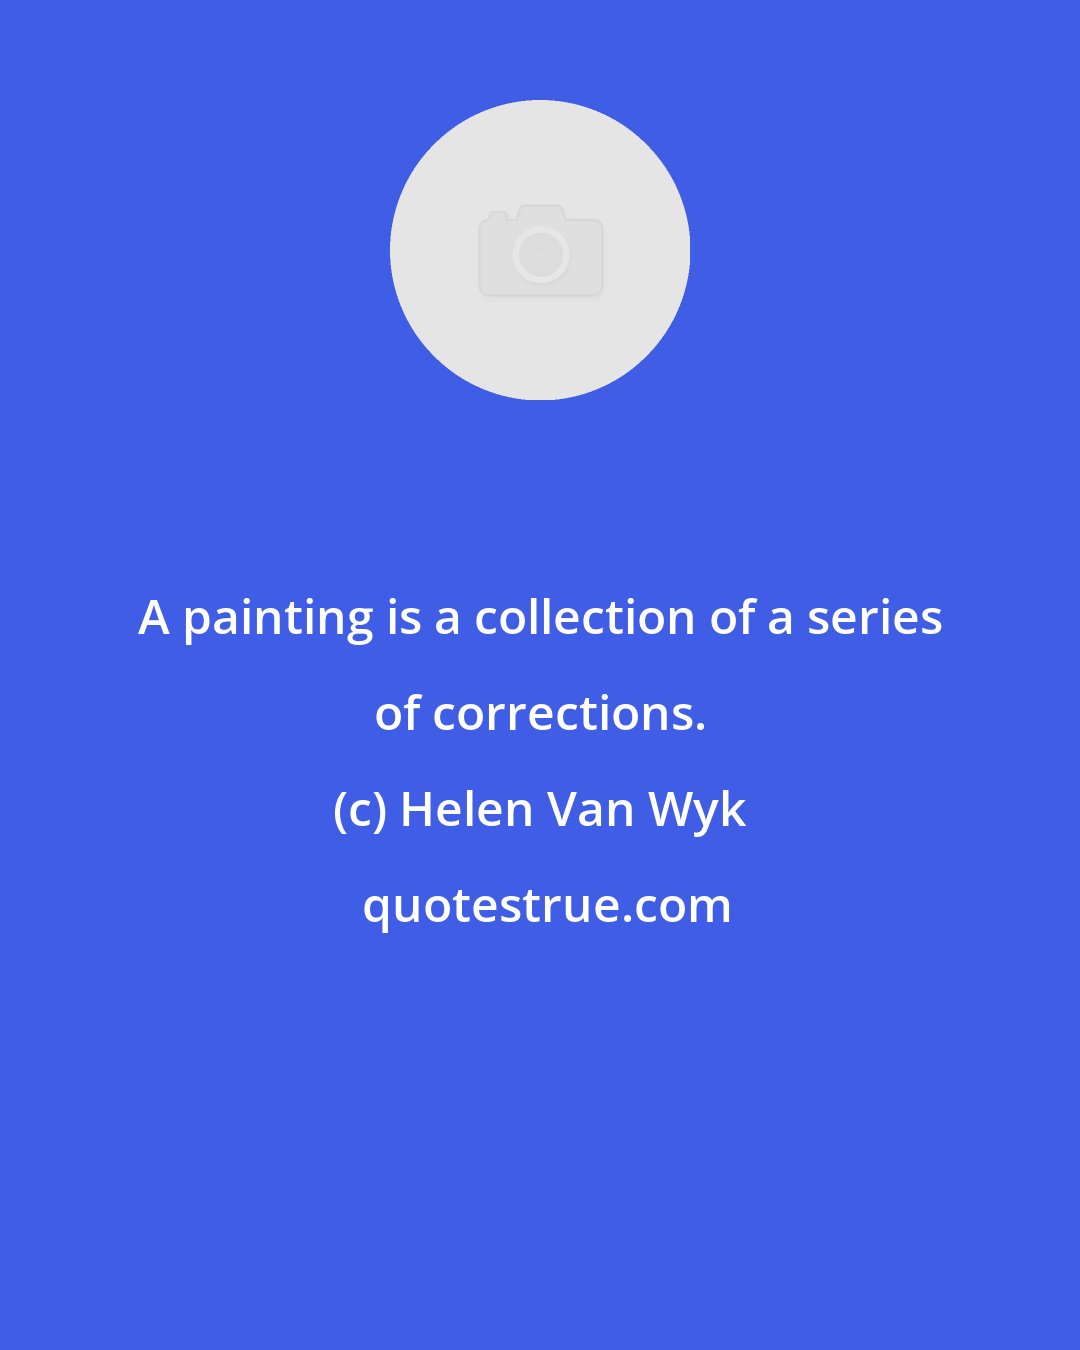 Helen Van Wyk: A painting is a collection of a series of corrections.